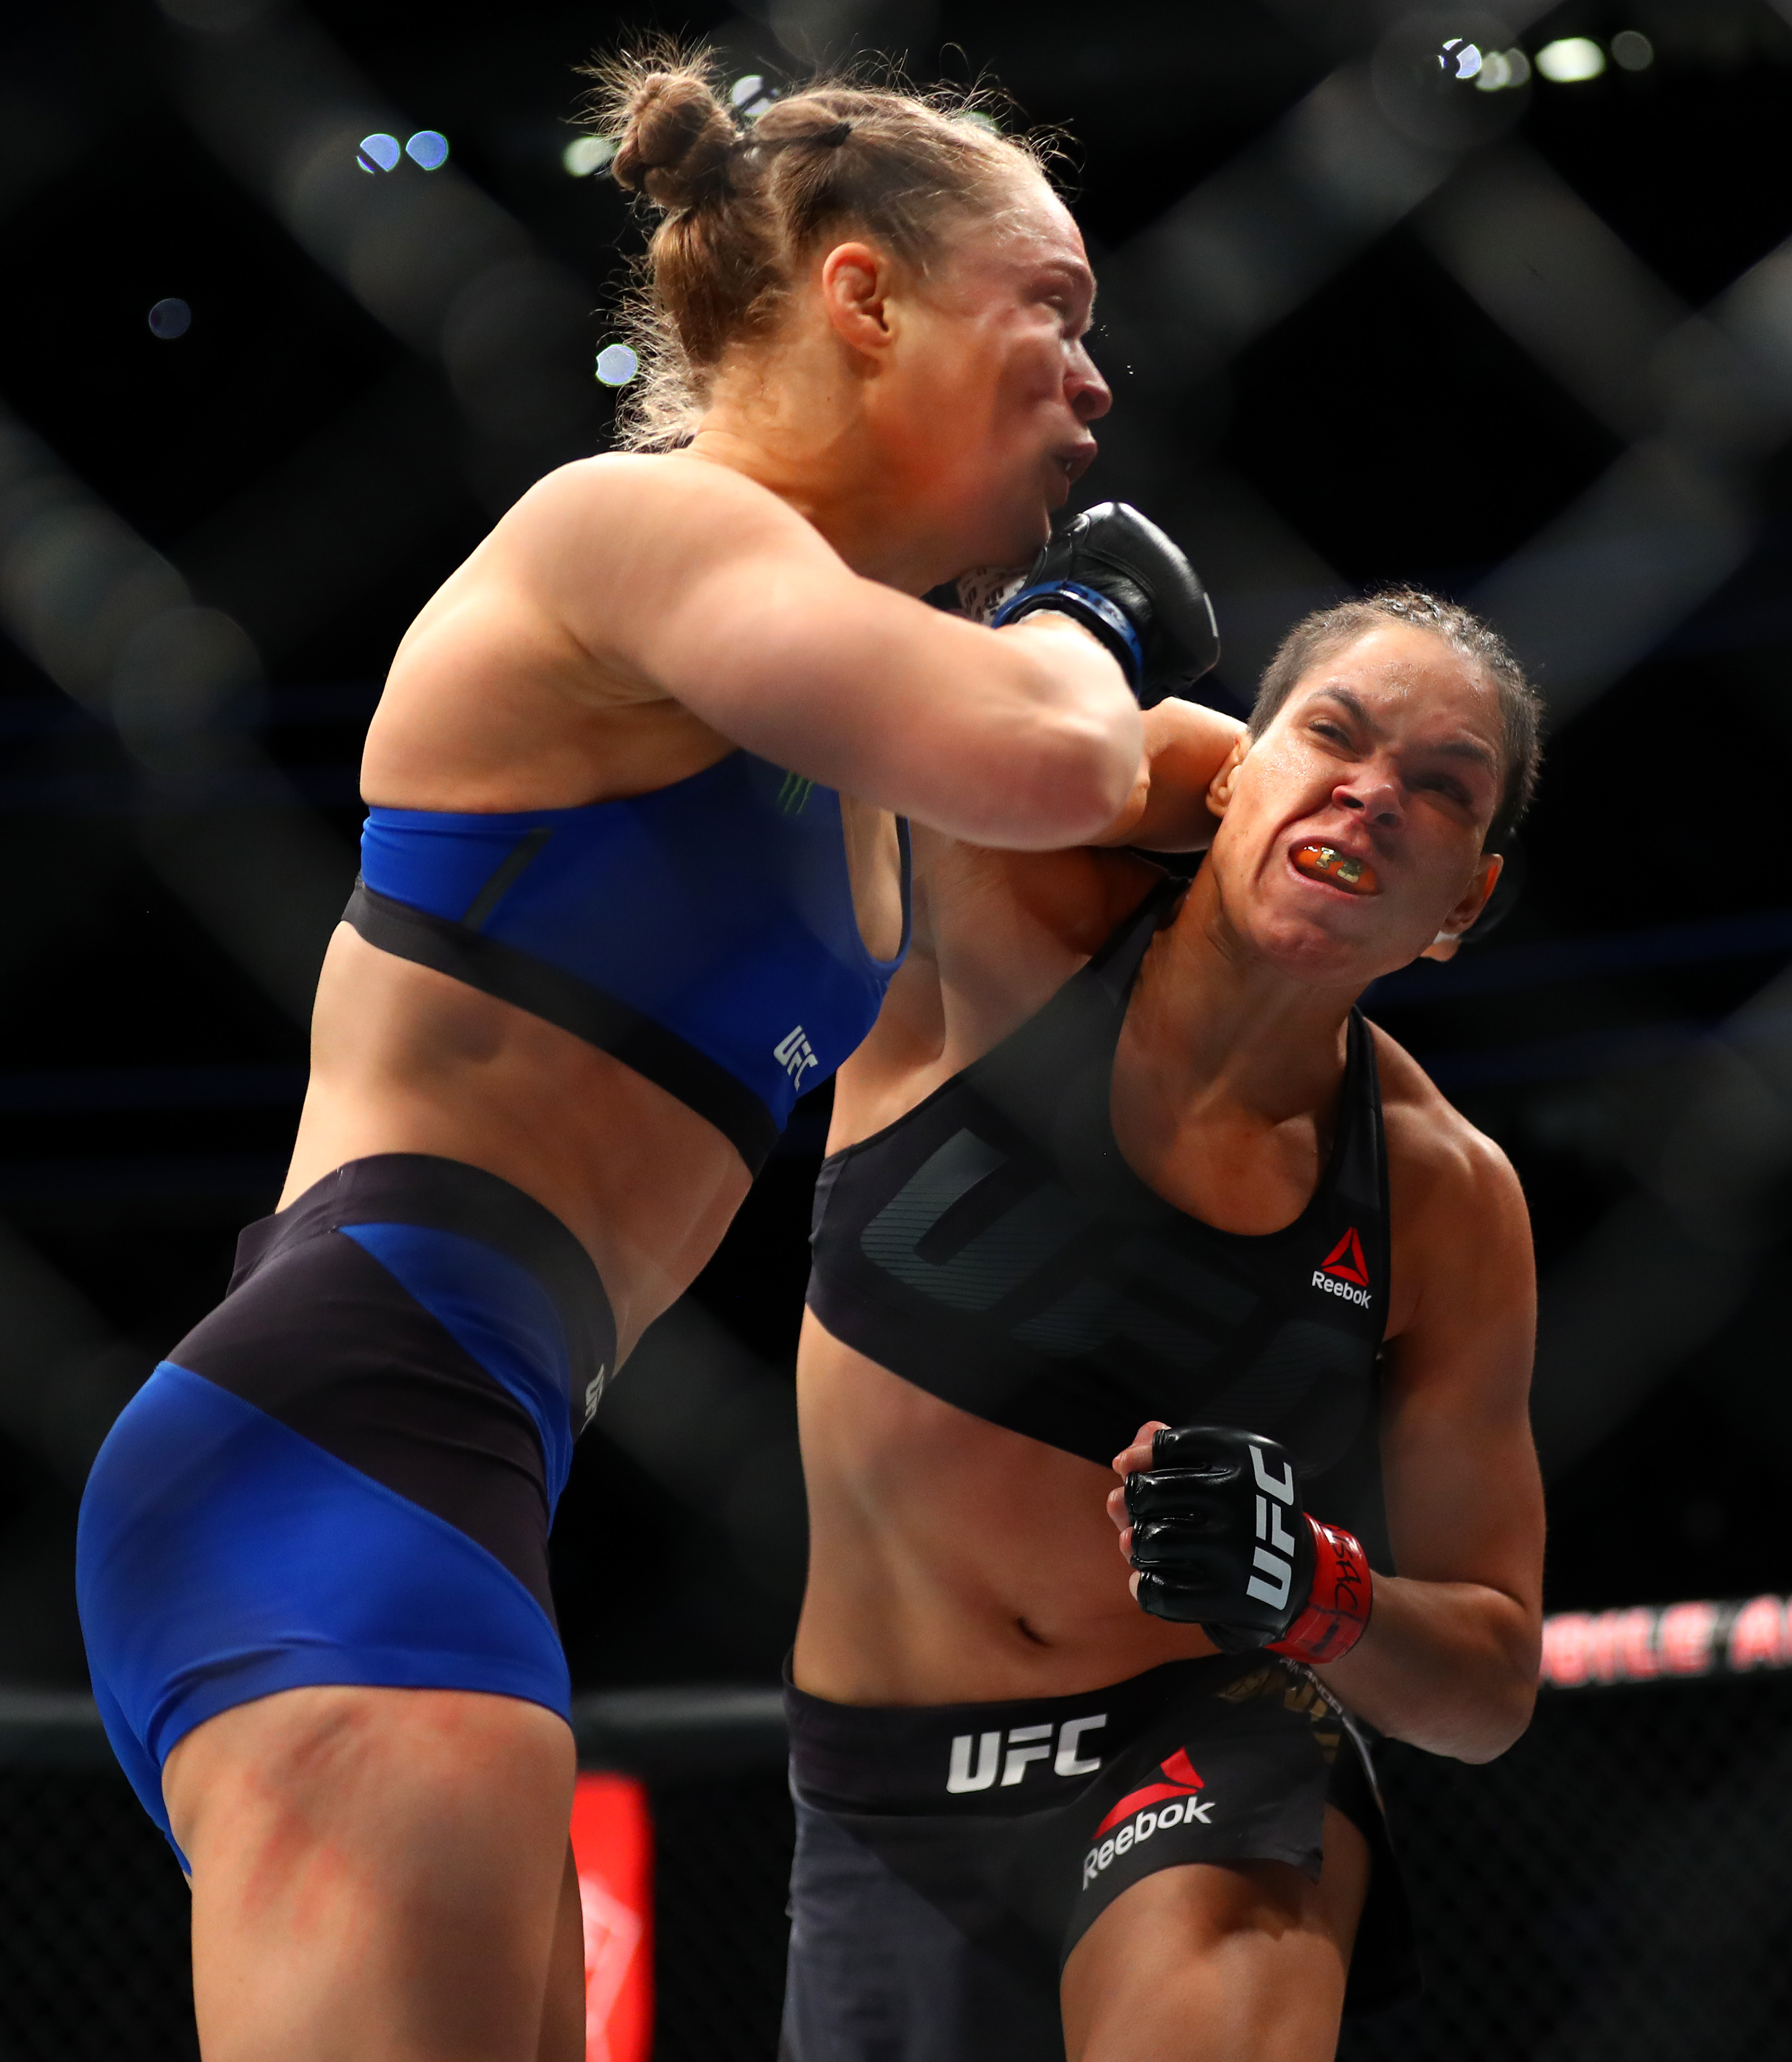 Ronda Rousey hasn't fought since being stopped by Amanda Nunes at UFC 207